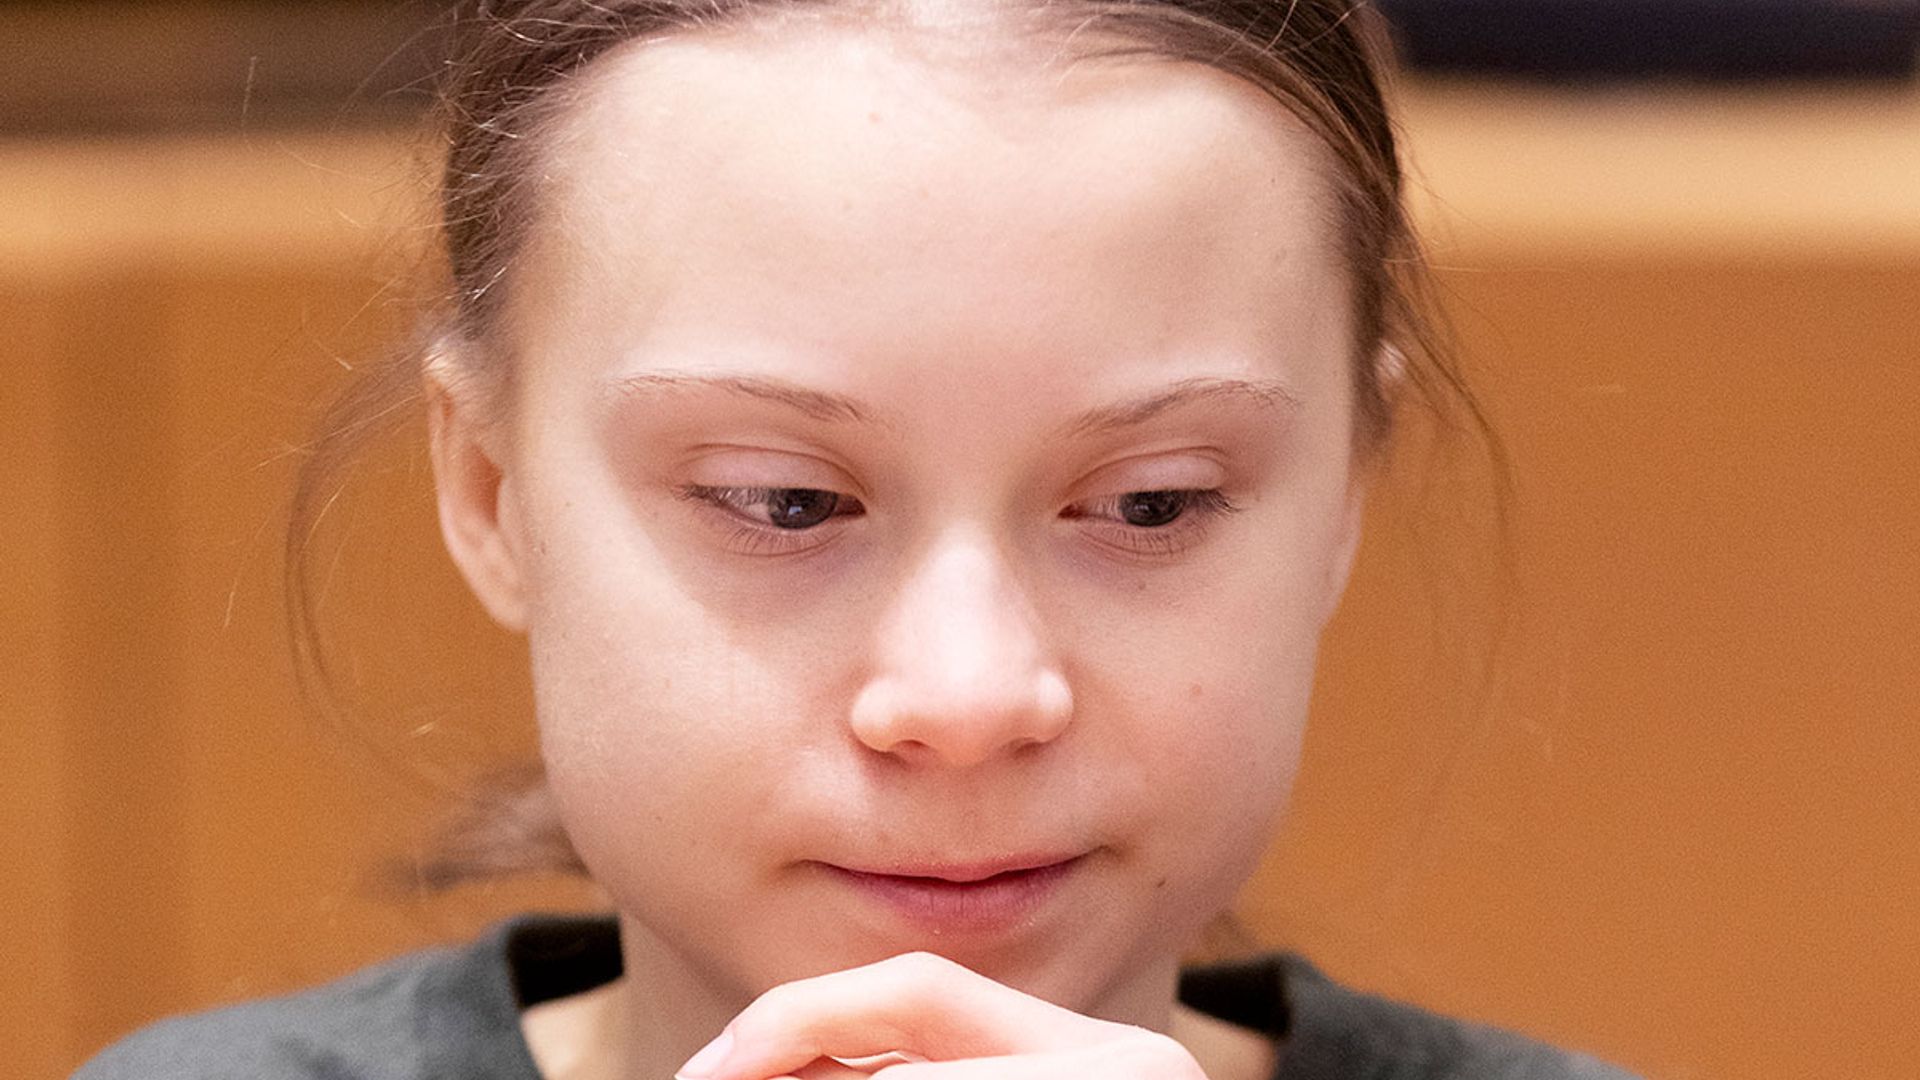 Greta Thunberg reveals she has COVID-19 in desperate plea to young people